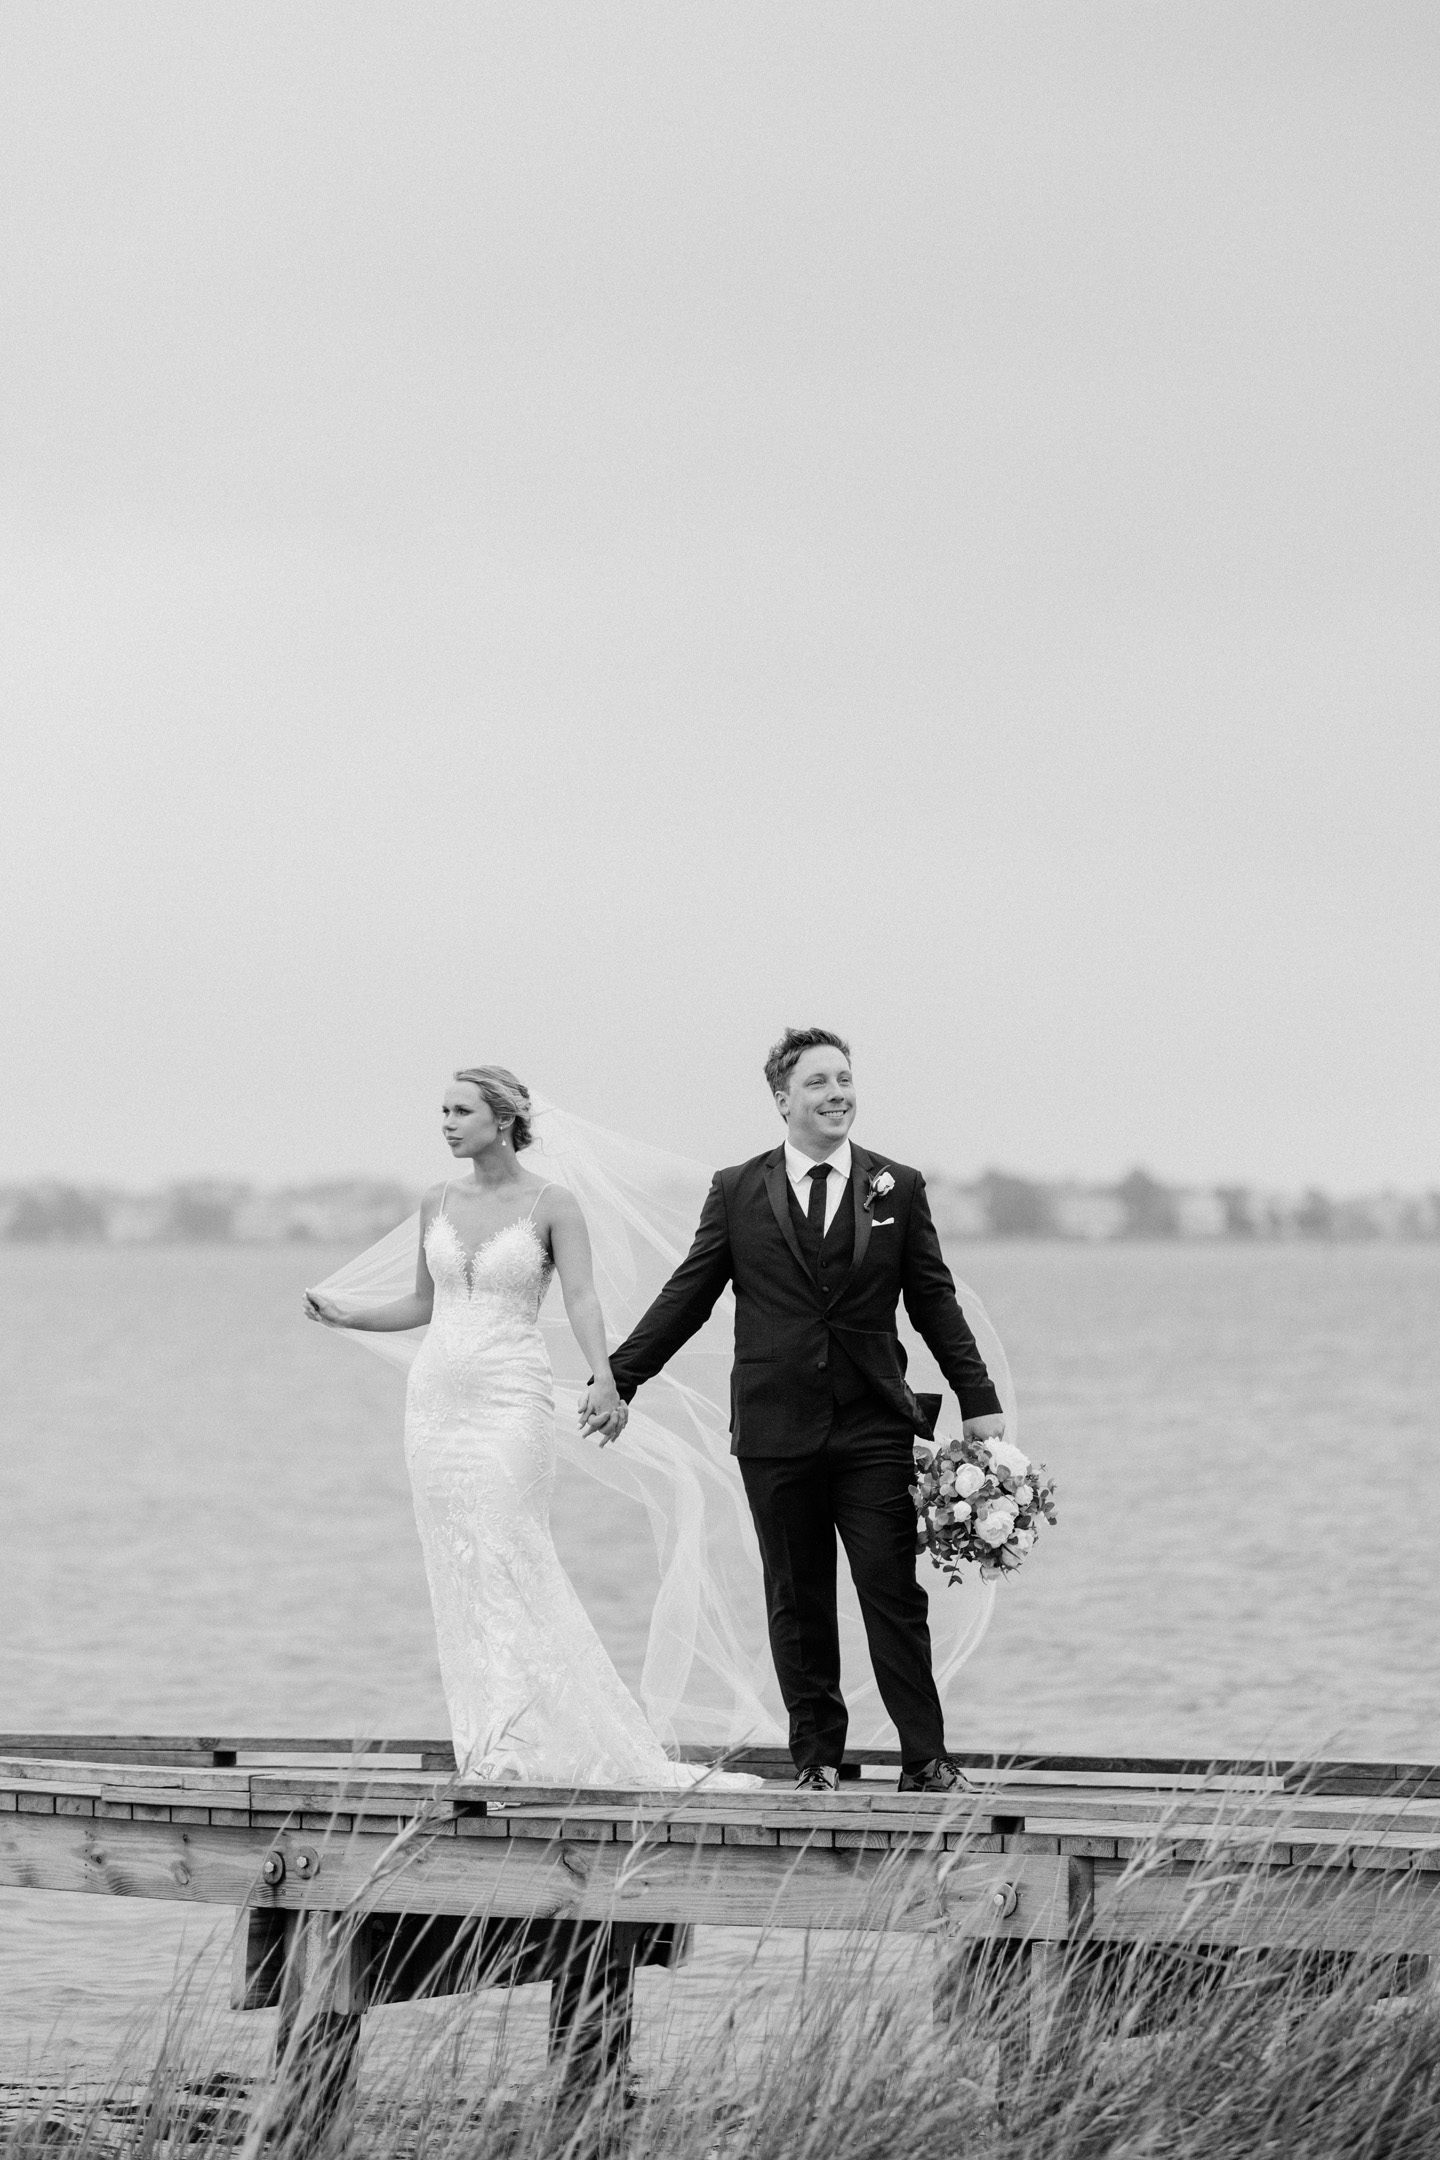 Wedding photography on the dock at Festival Park